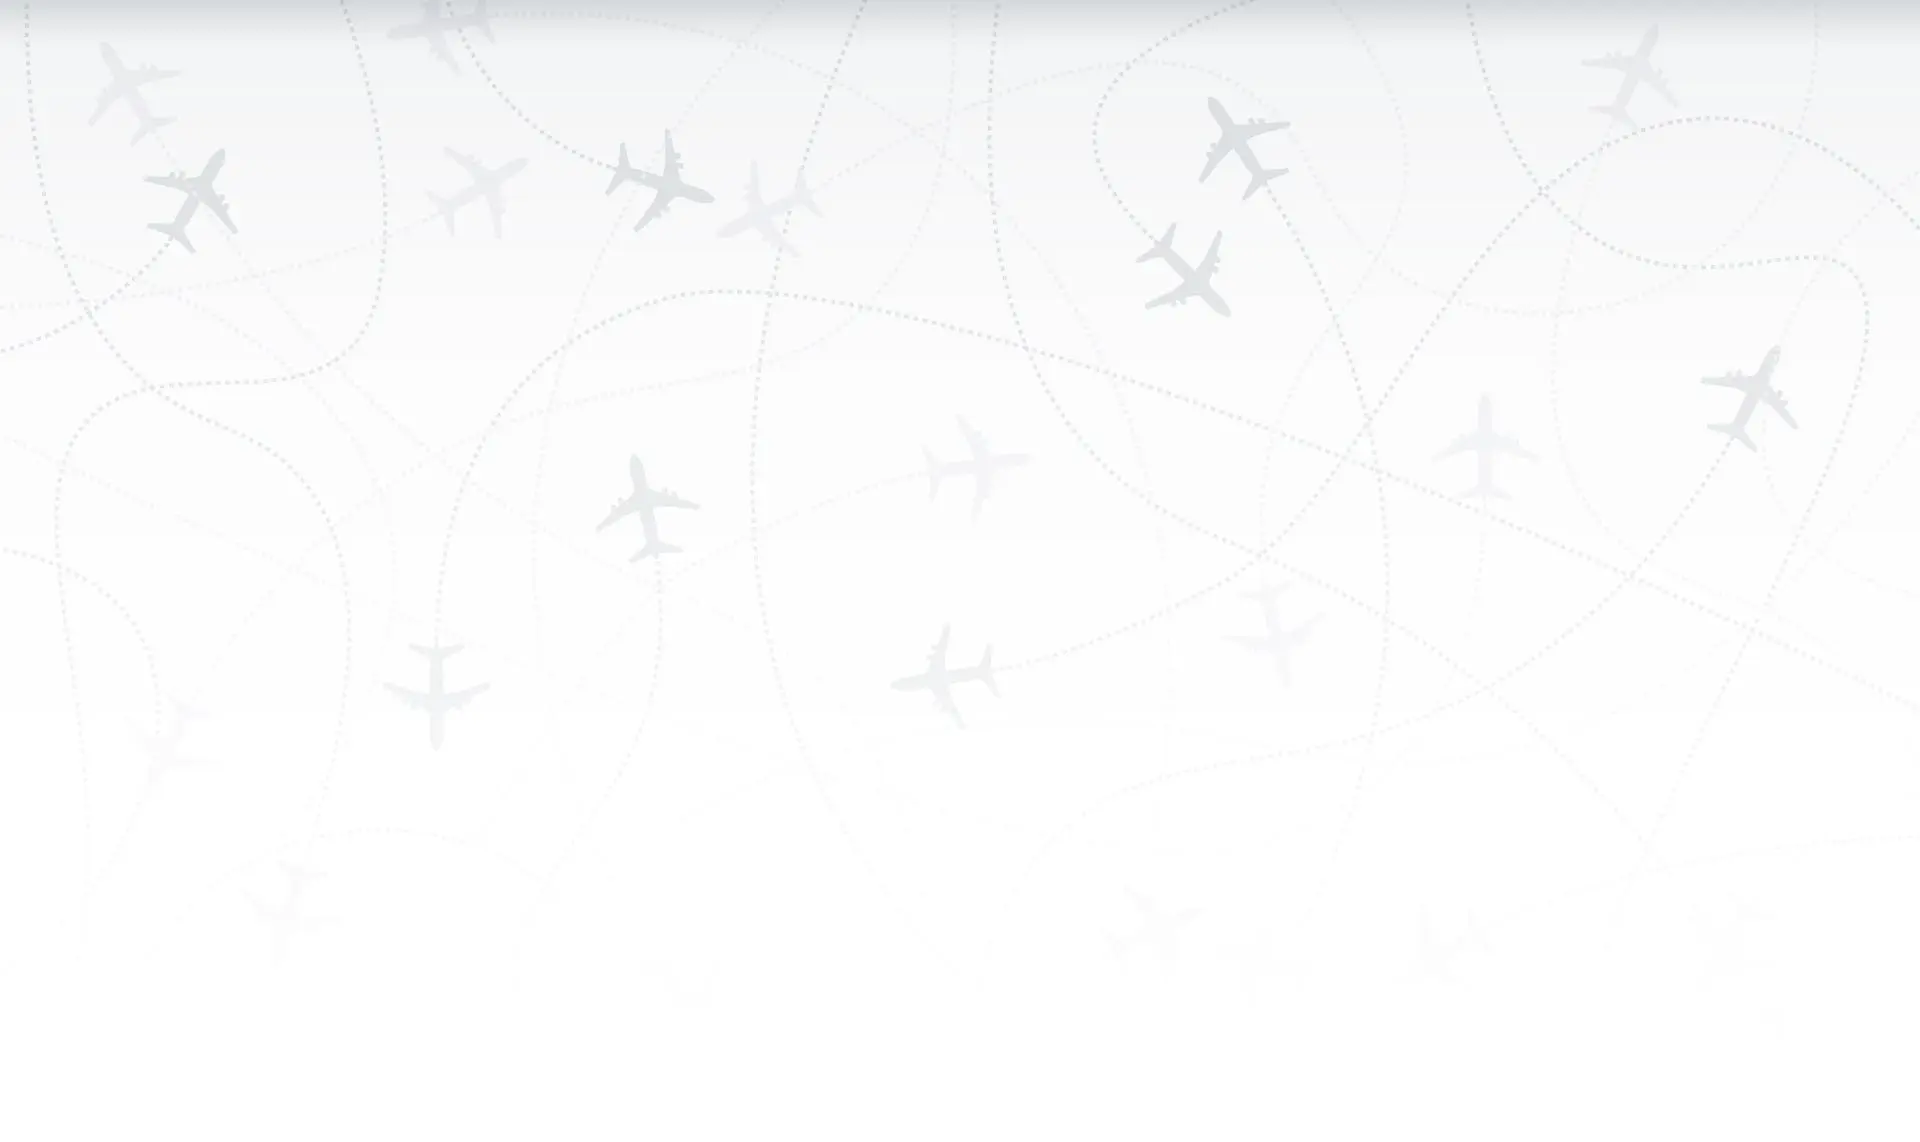 A grey and white background image that contains silhouettes of airplanes.